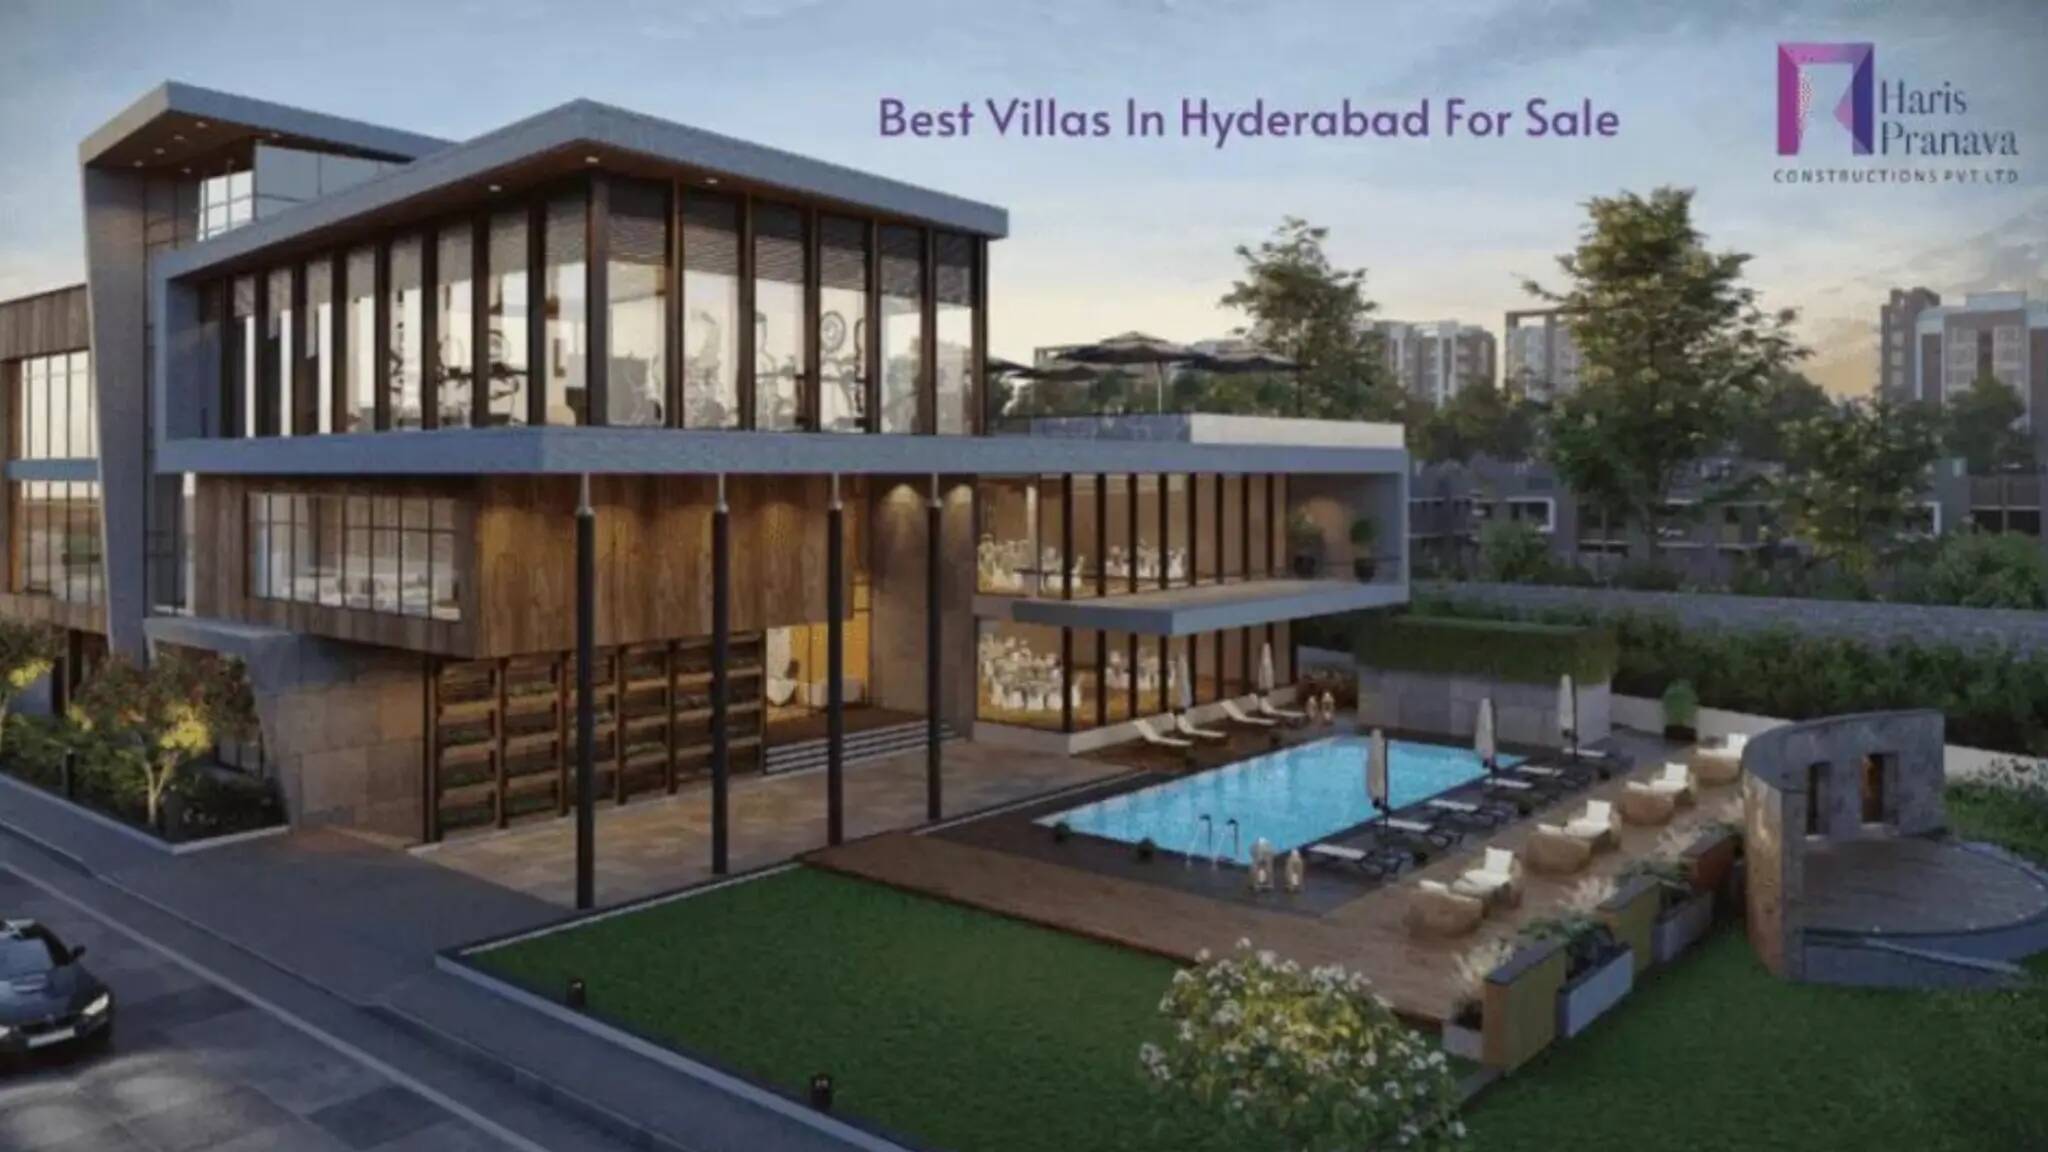 How To Find The Best Villas In Hyderabad For Sale